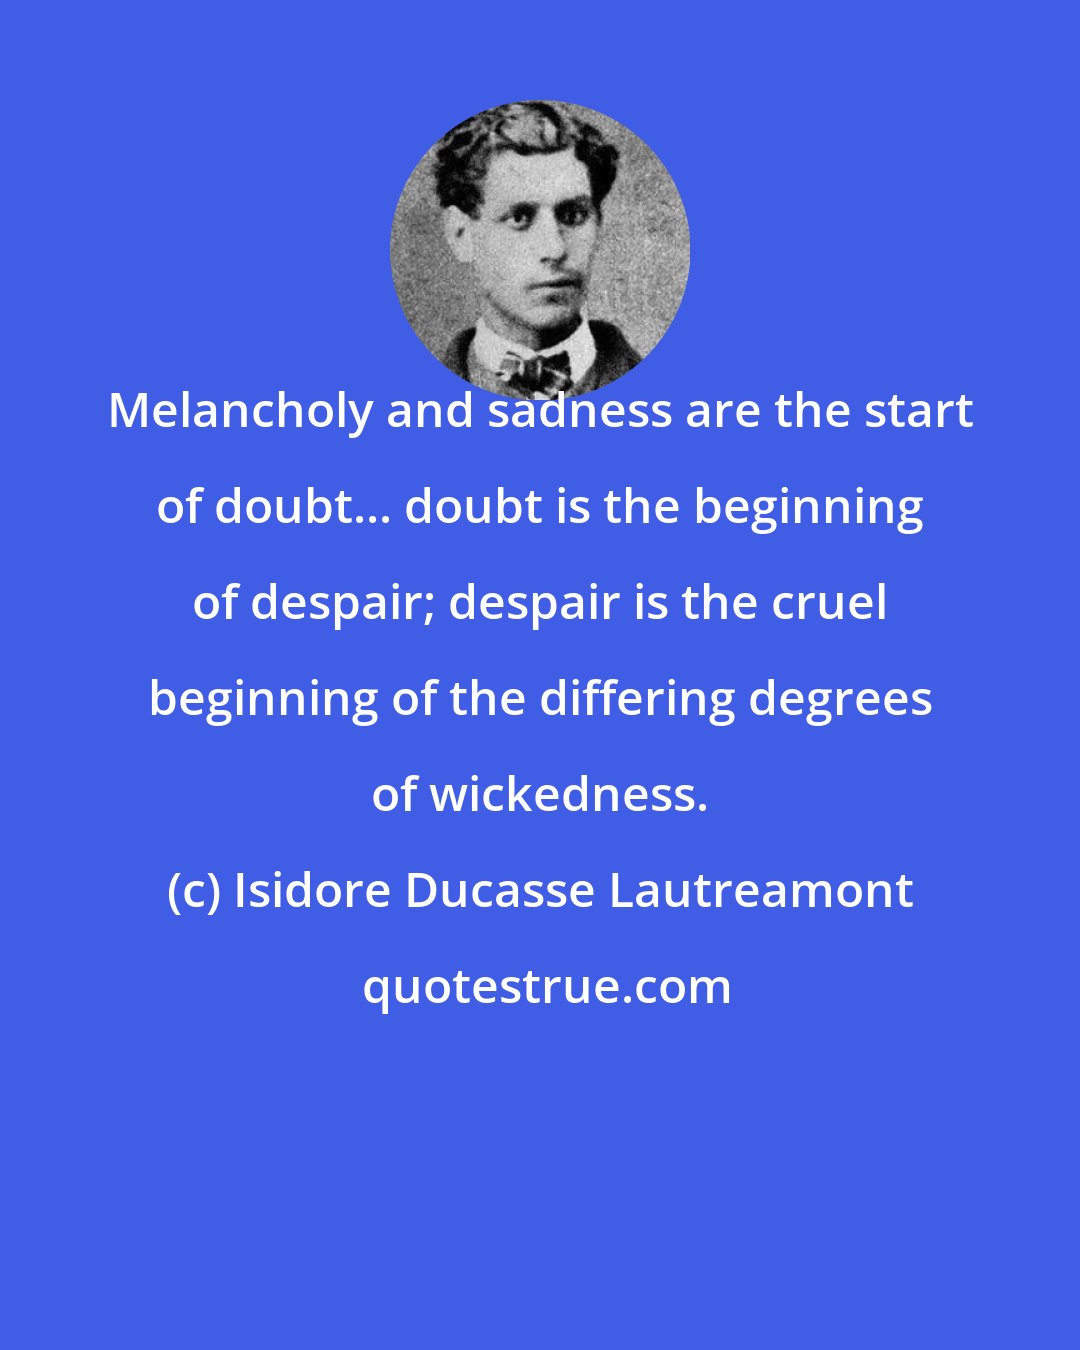 Isidore Ducasse Lautreamont: Melancholy and sadness are the start of doubt... doubt is the beginning of despair; despair is the cruel beginning of the differing degrees of wickedness.